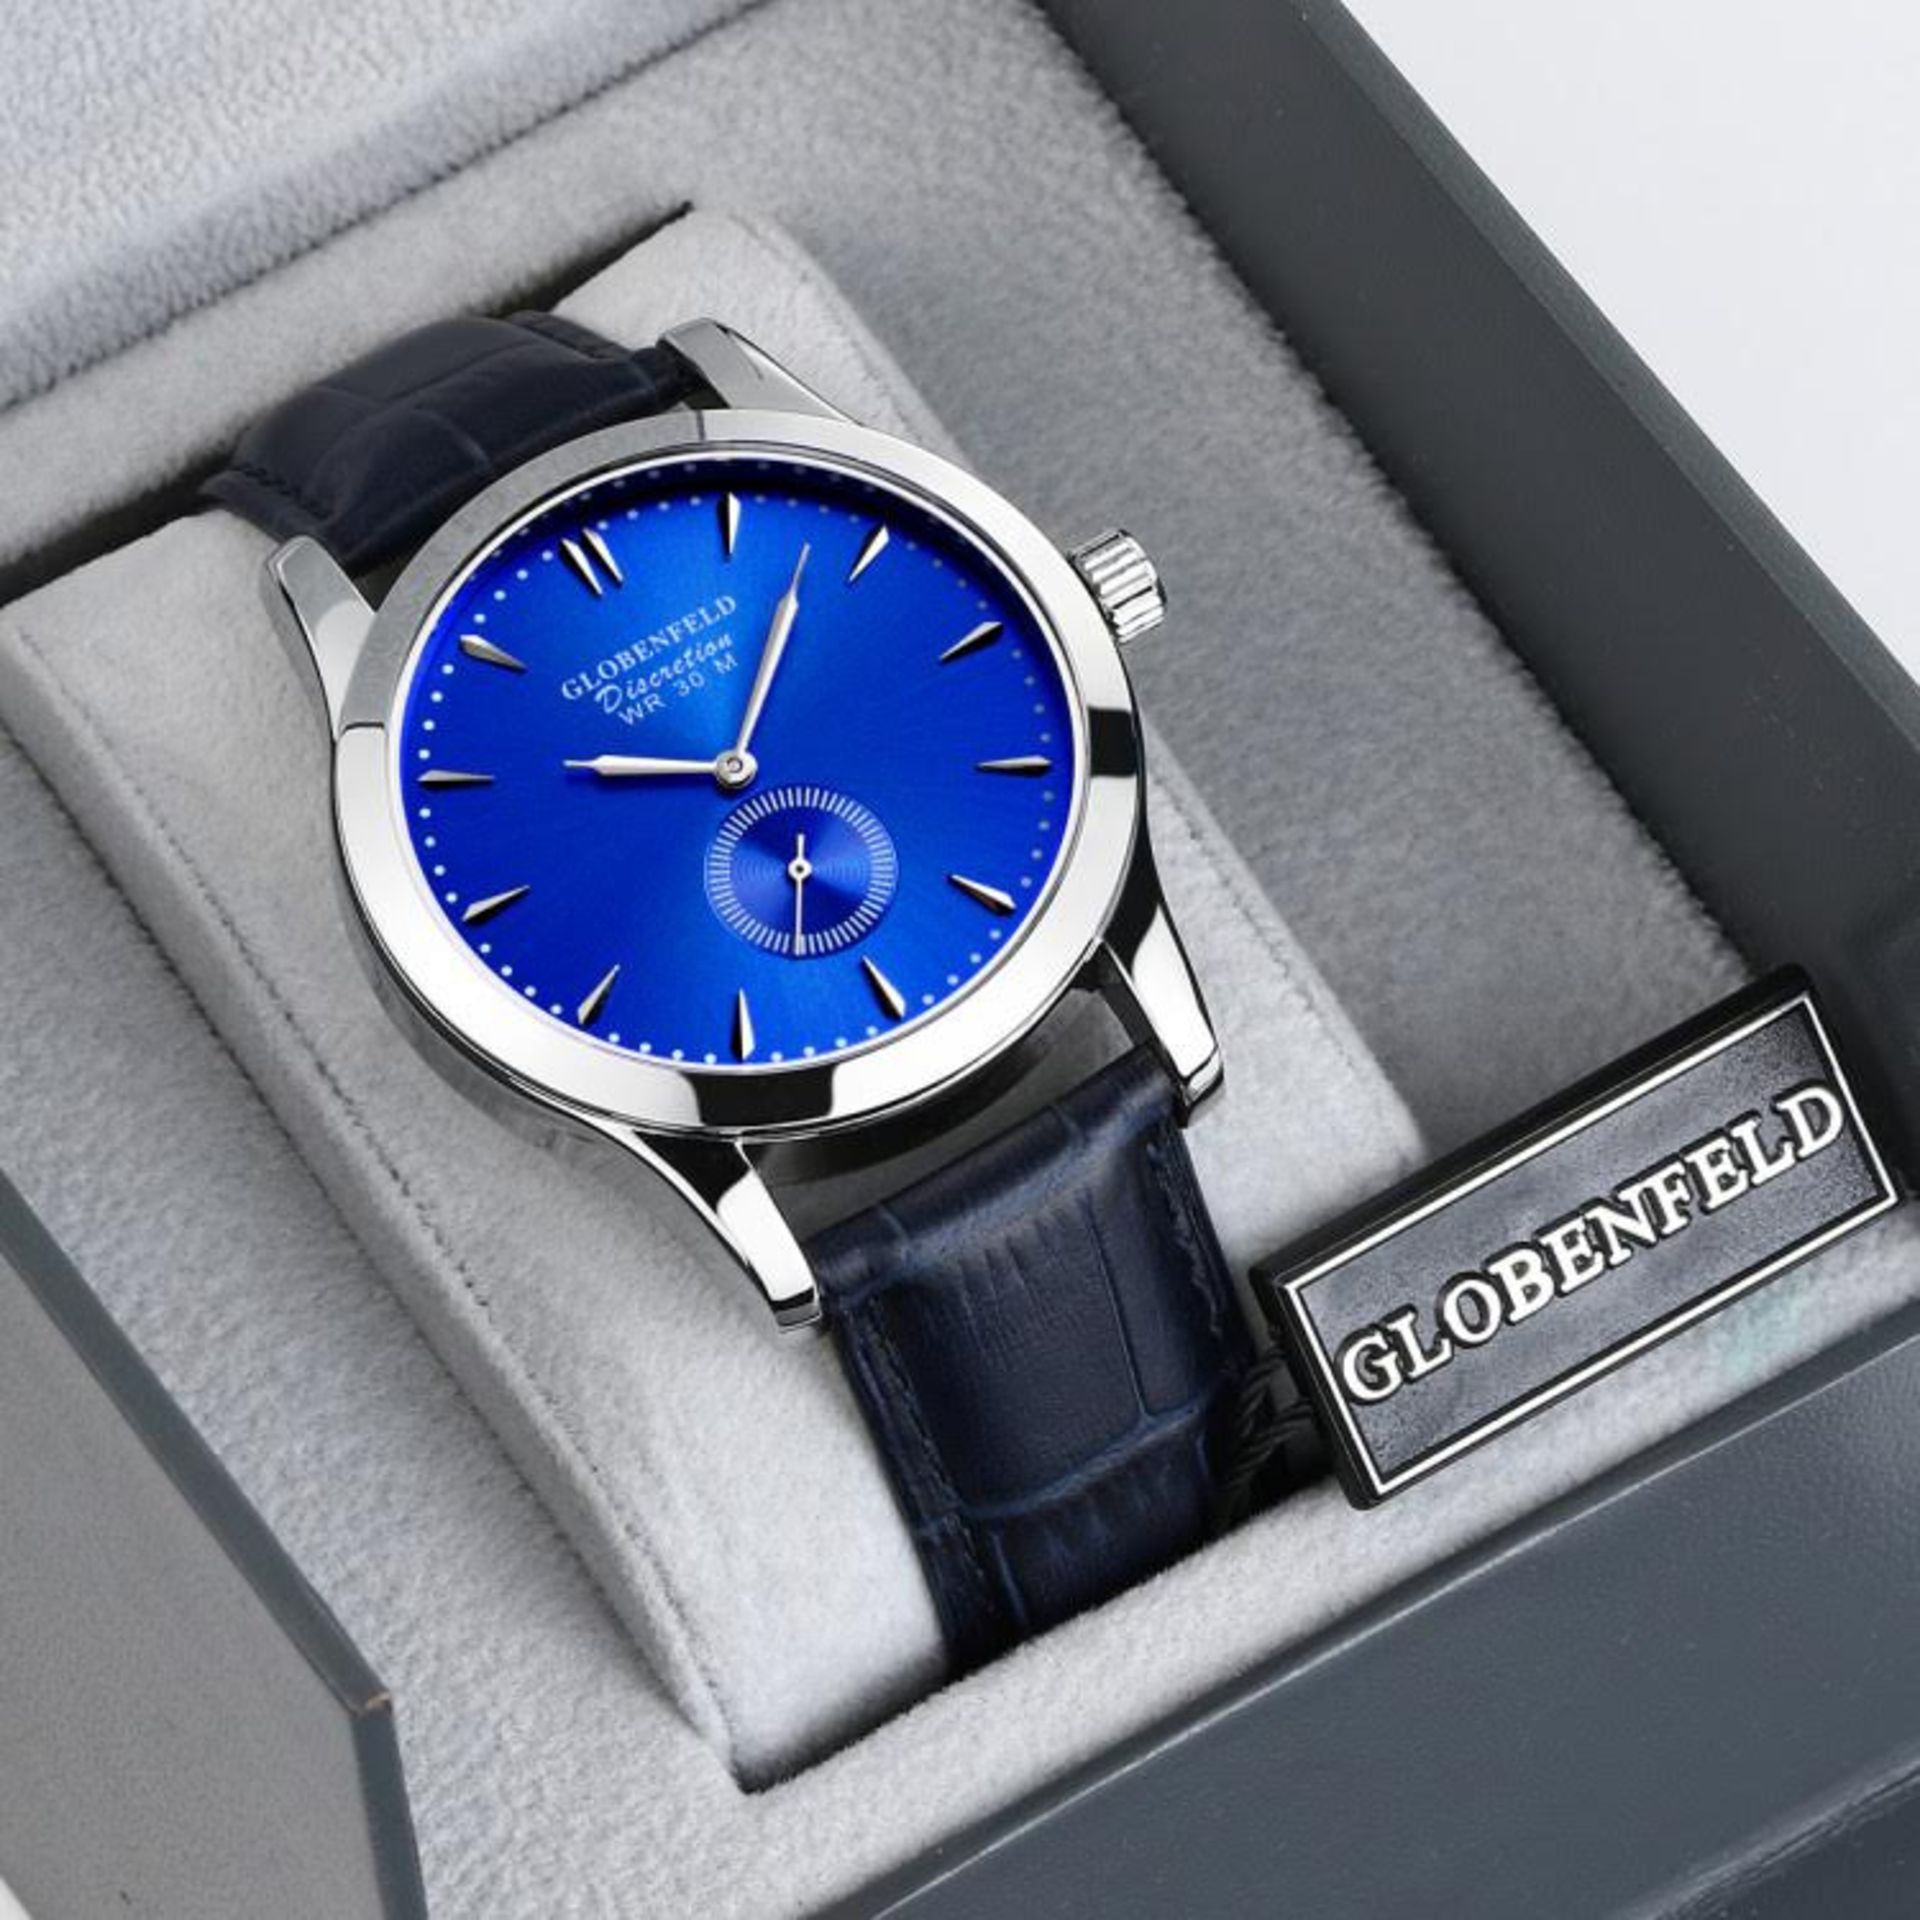 V Brand New Gents Globenfeld Discretion Blue Face - Blue Leather Strap with Box and Papers RRP £425